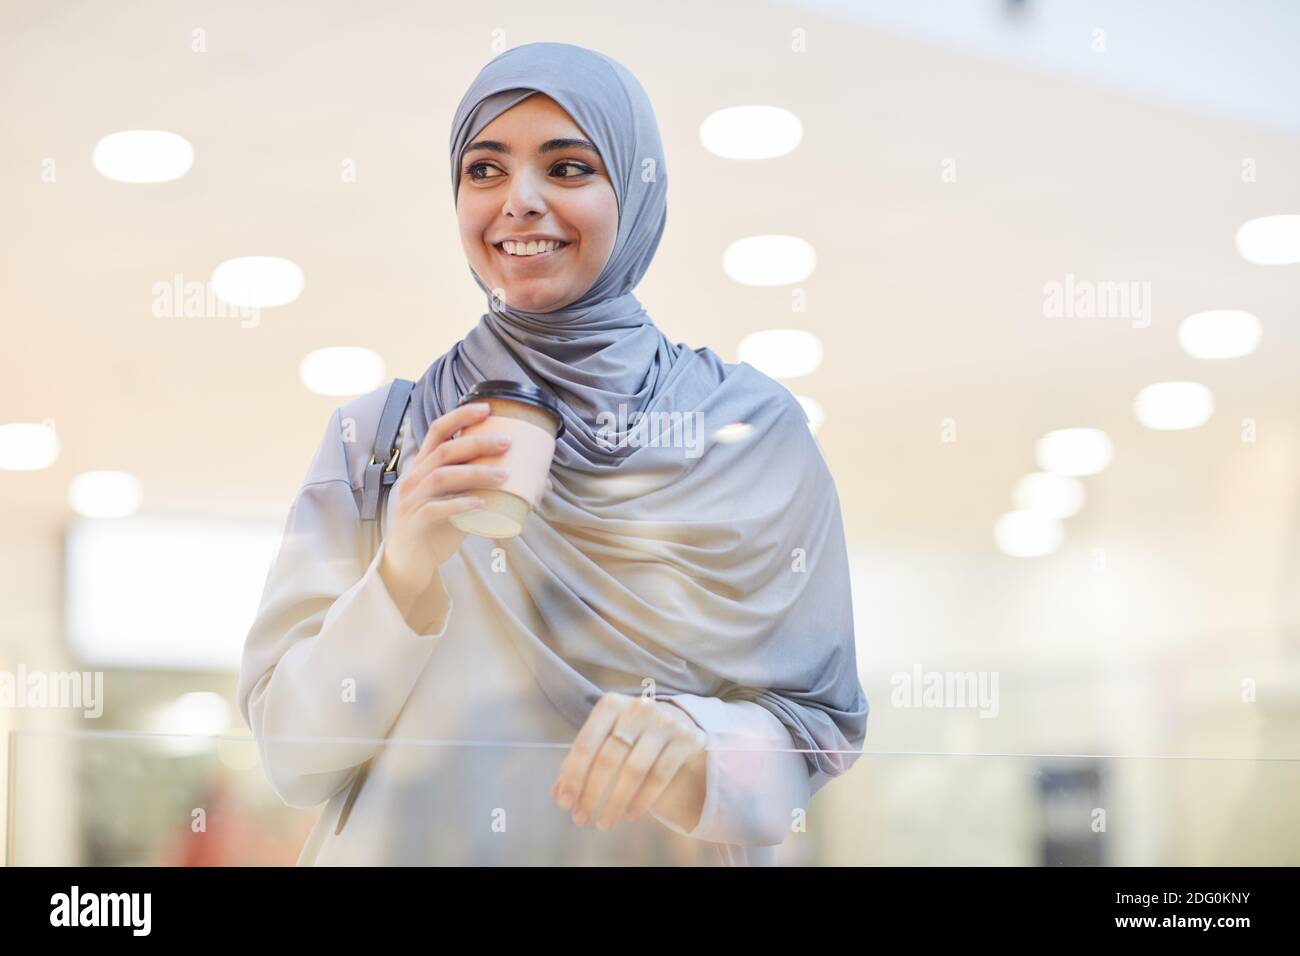 Waist up portrait of young Middle-Eastern woman wearing headscarf and holding coffee cup while enjoying shopping in city, copy space Stock Photo